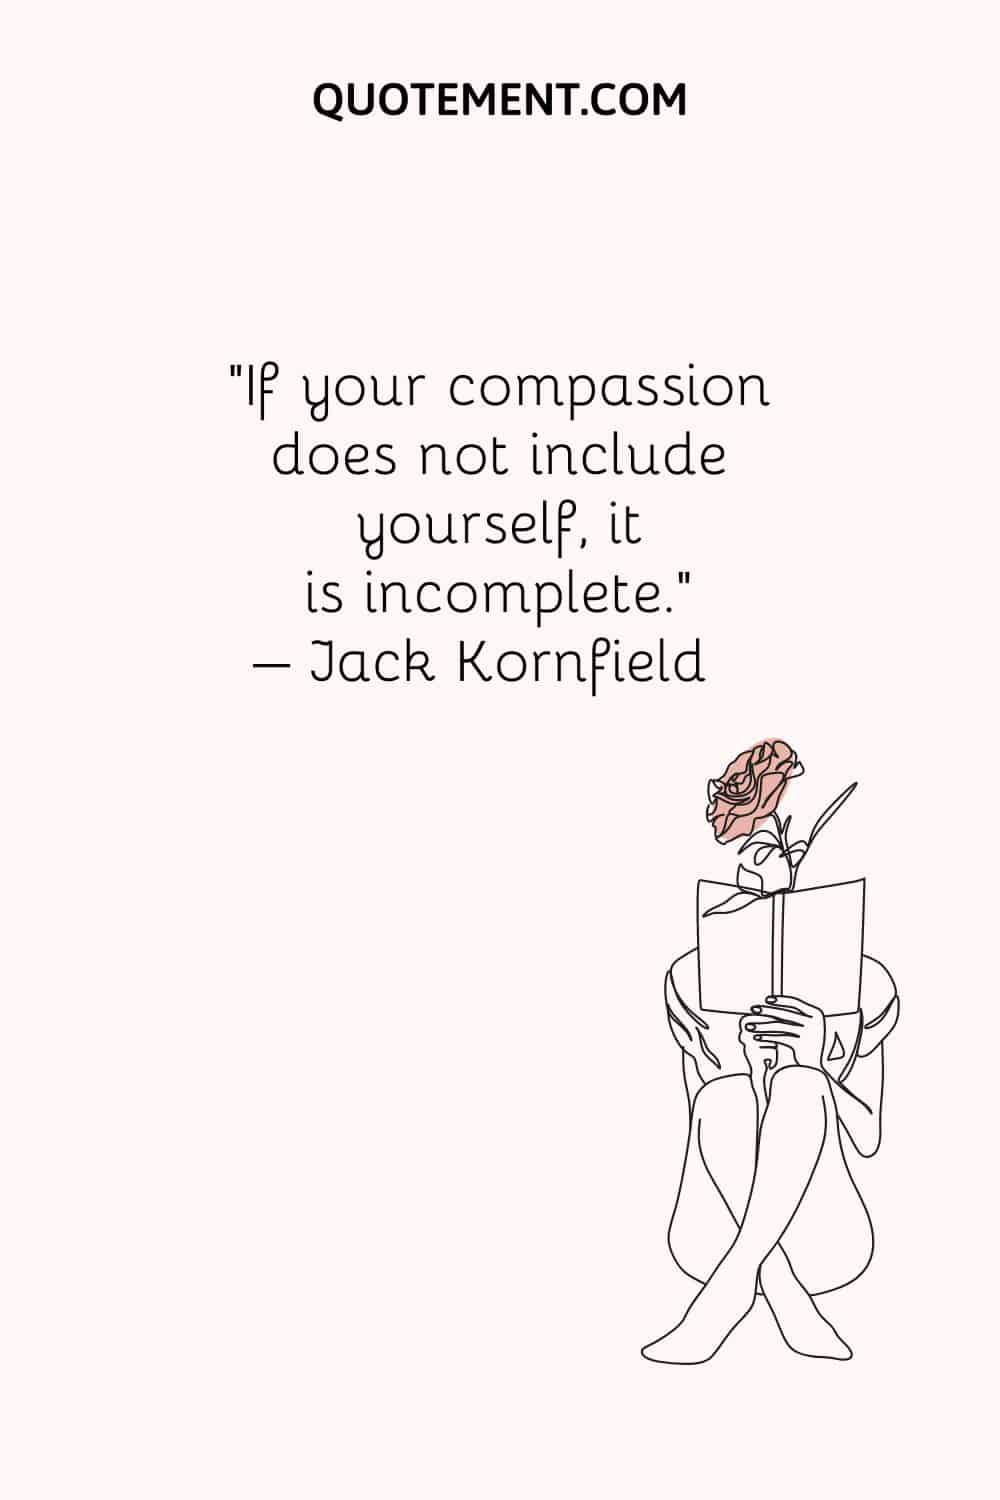 If your compassion does not include yourself, it is incomplete